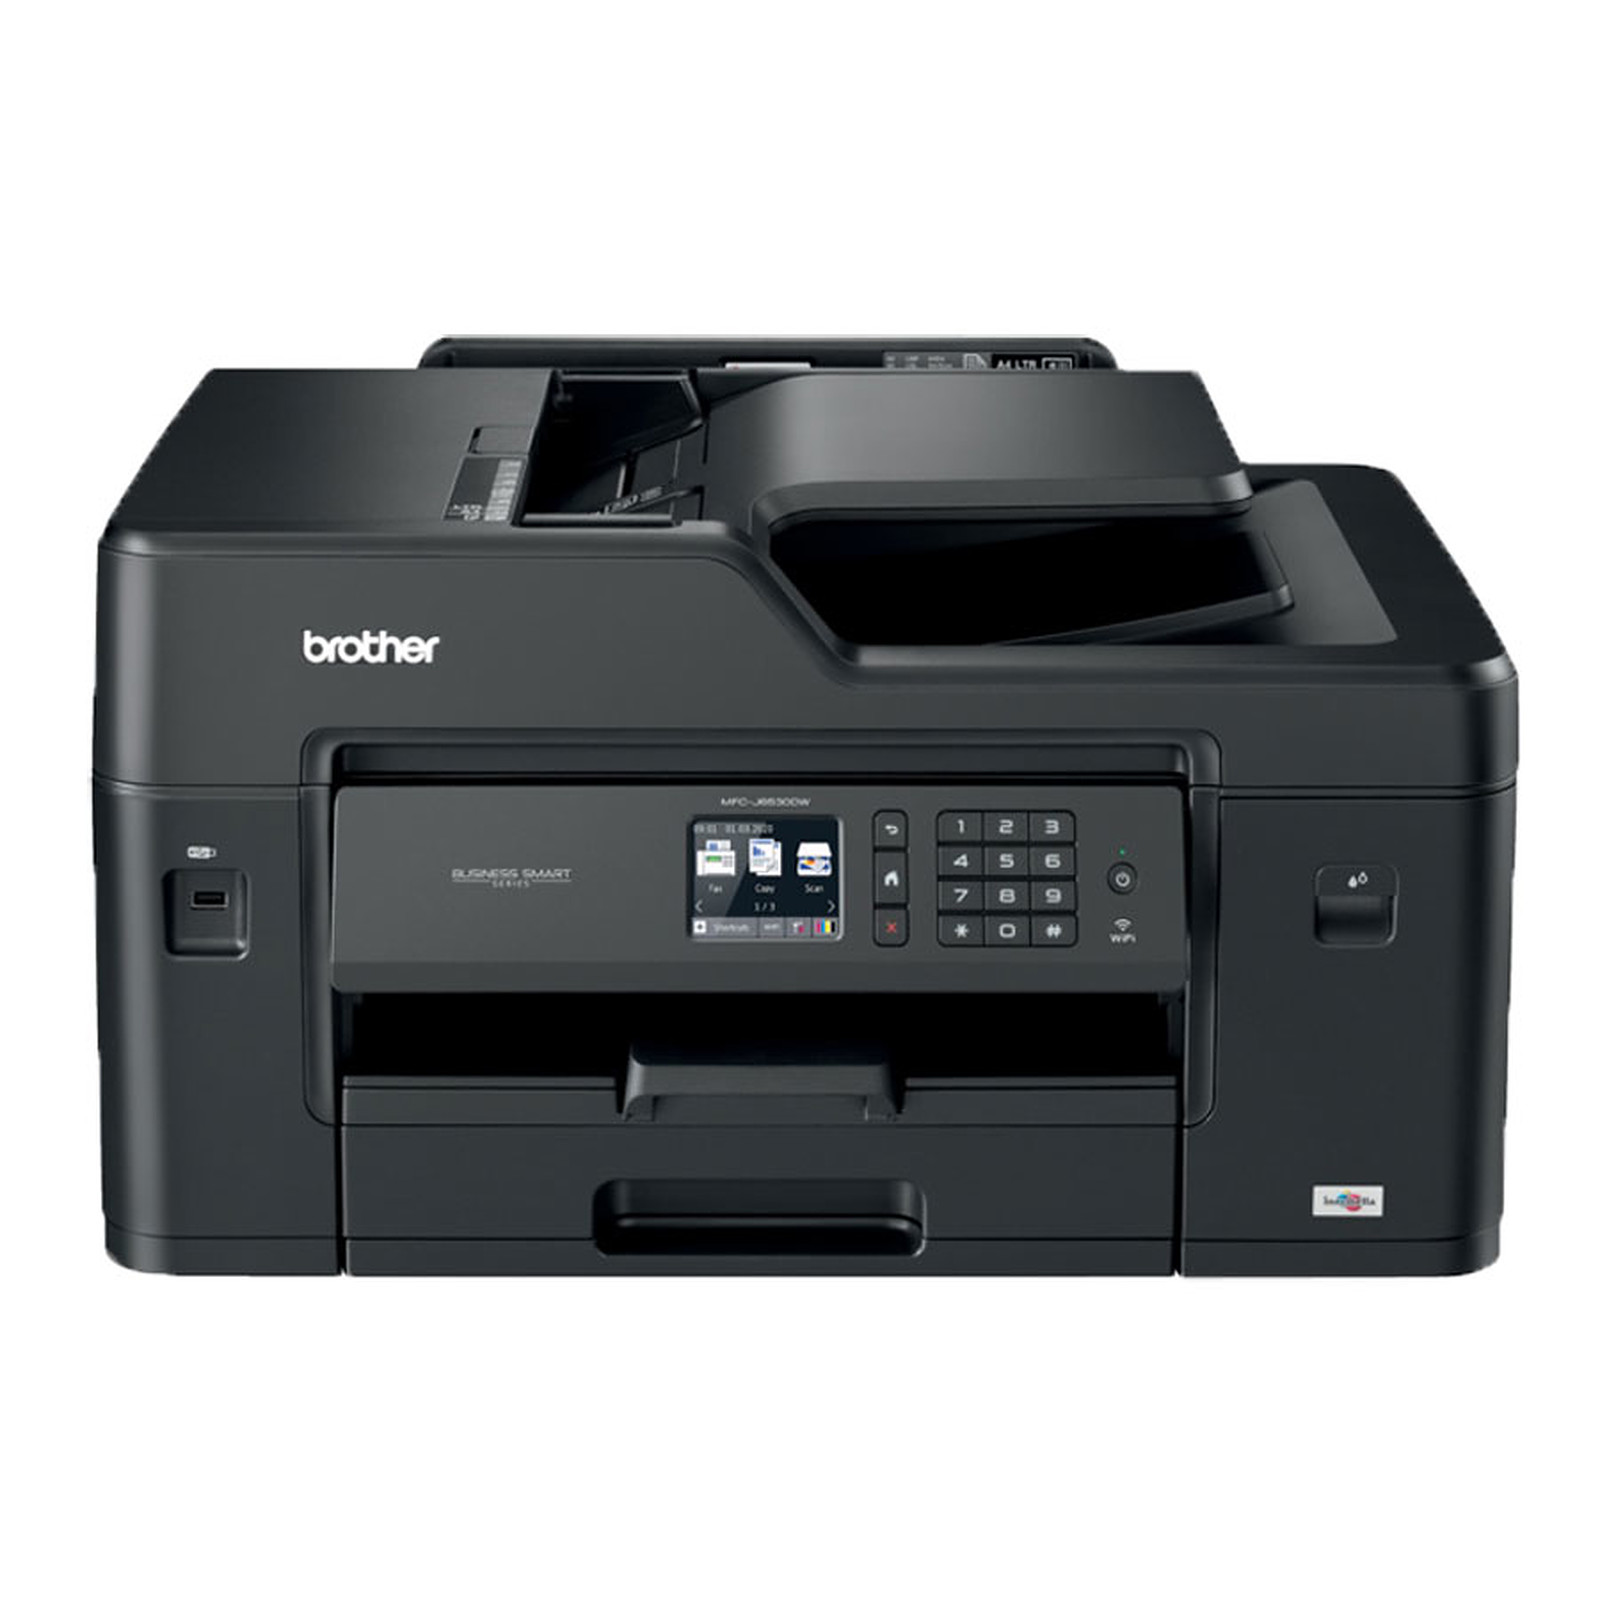 Brother MFC-J6530DW · Occasion - Imprimante multifonction Brother - Occasion